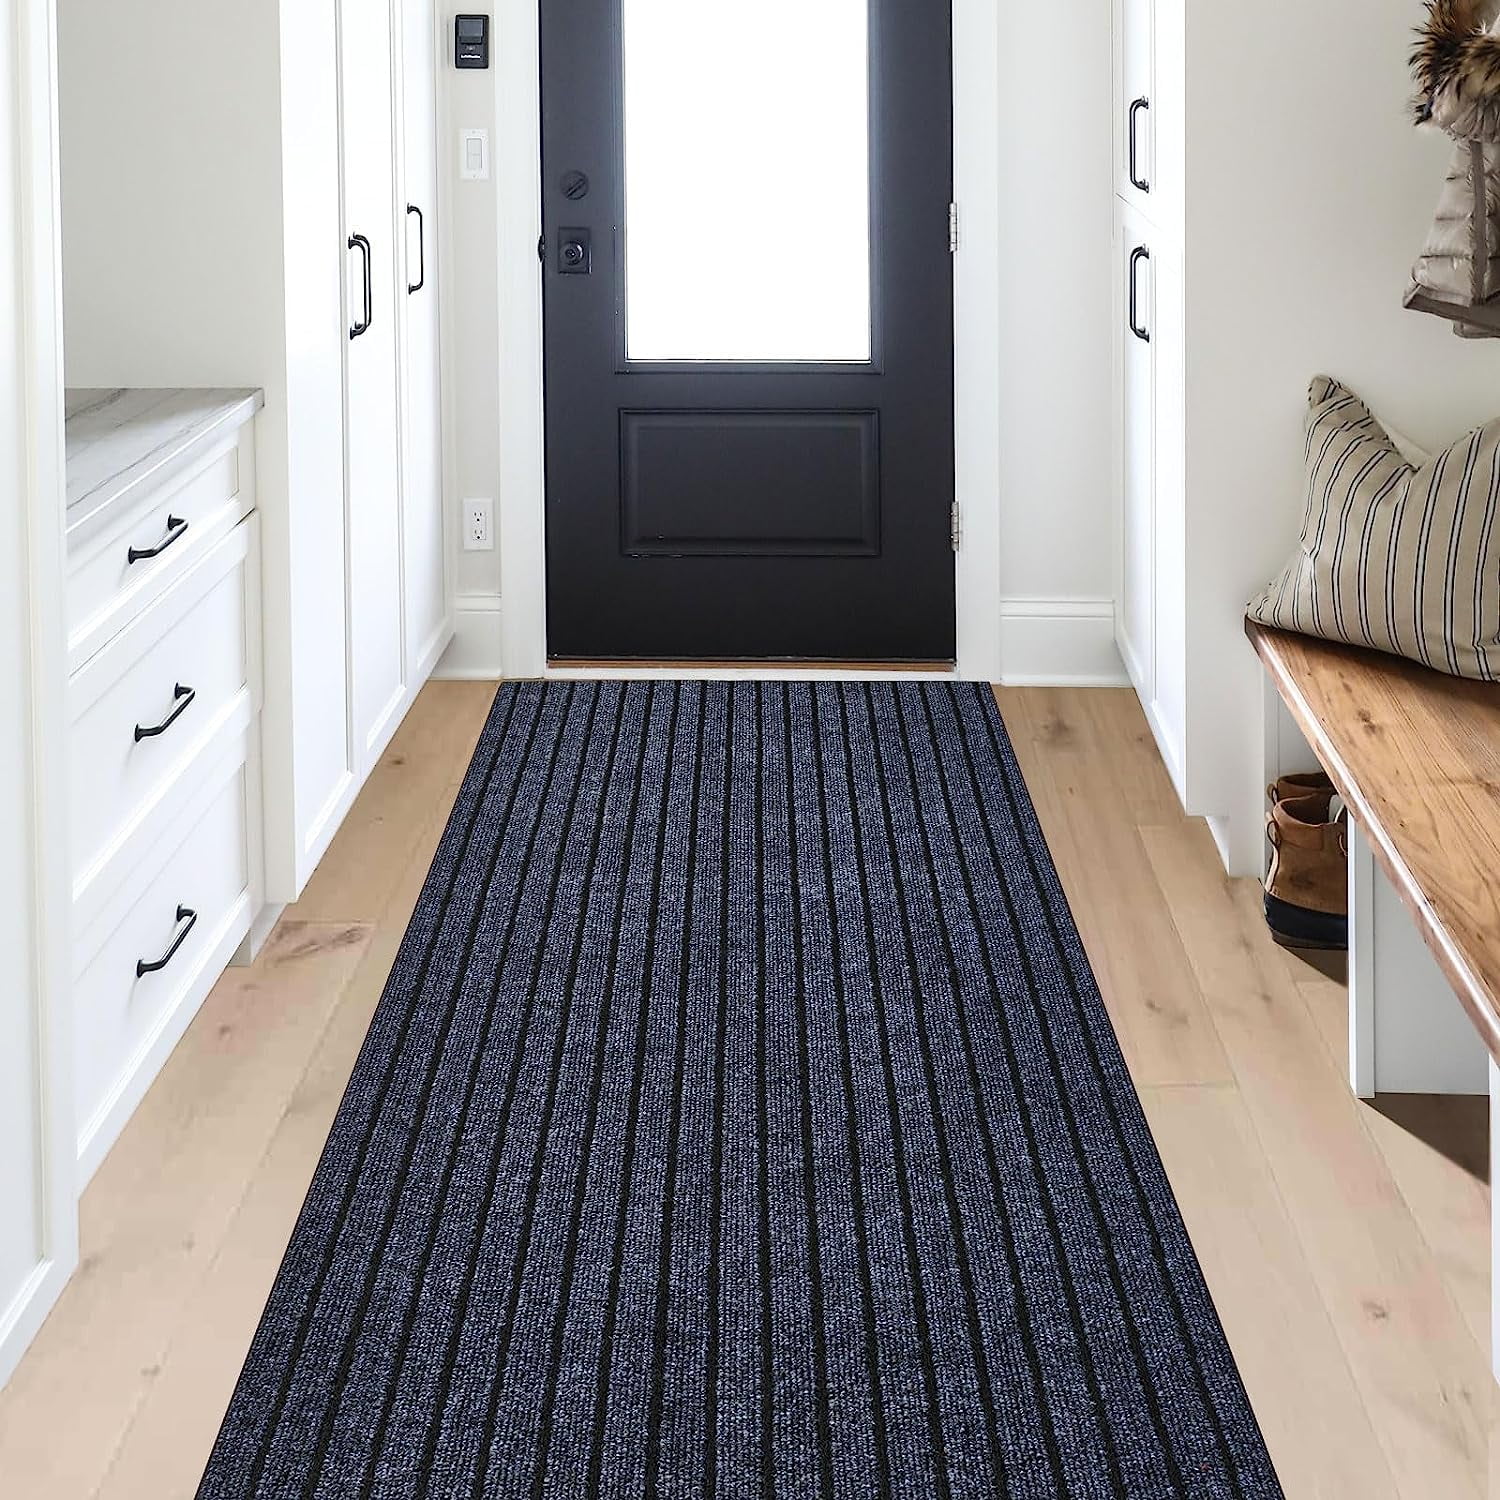  Morefany Outdoor/Indoor 2ft x 60ft Runner Rug, Hallway Custom  Sizes Non-Slip Rubber Backing Area Runner Rugs Waterproof Carpet Rugs for  Kitchen Entryway Balcony Garage Stair Laundry : Patio, Lawn & Garden